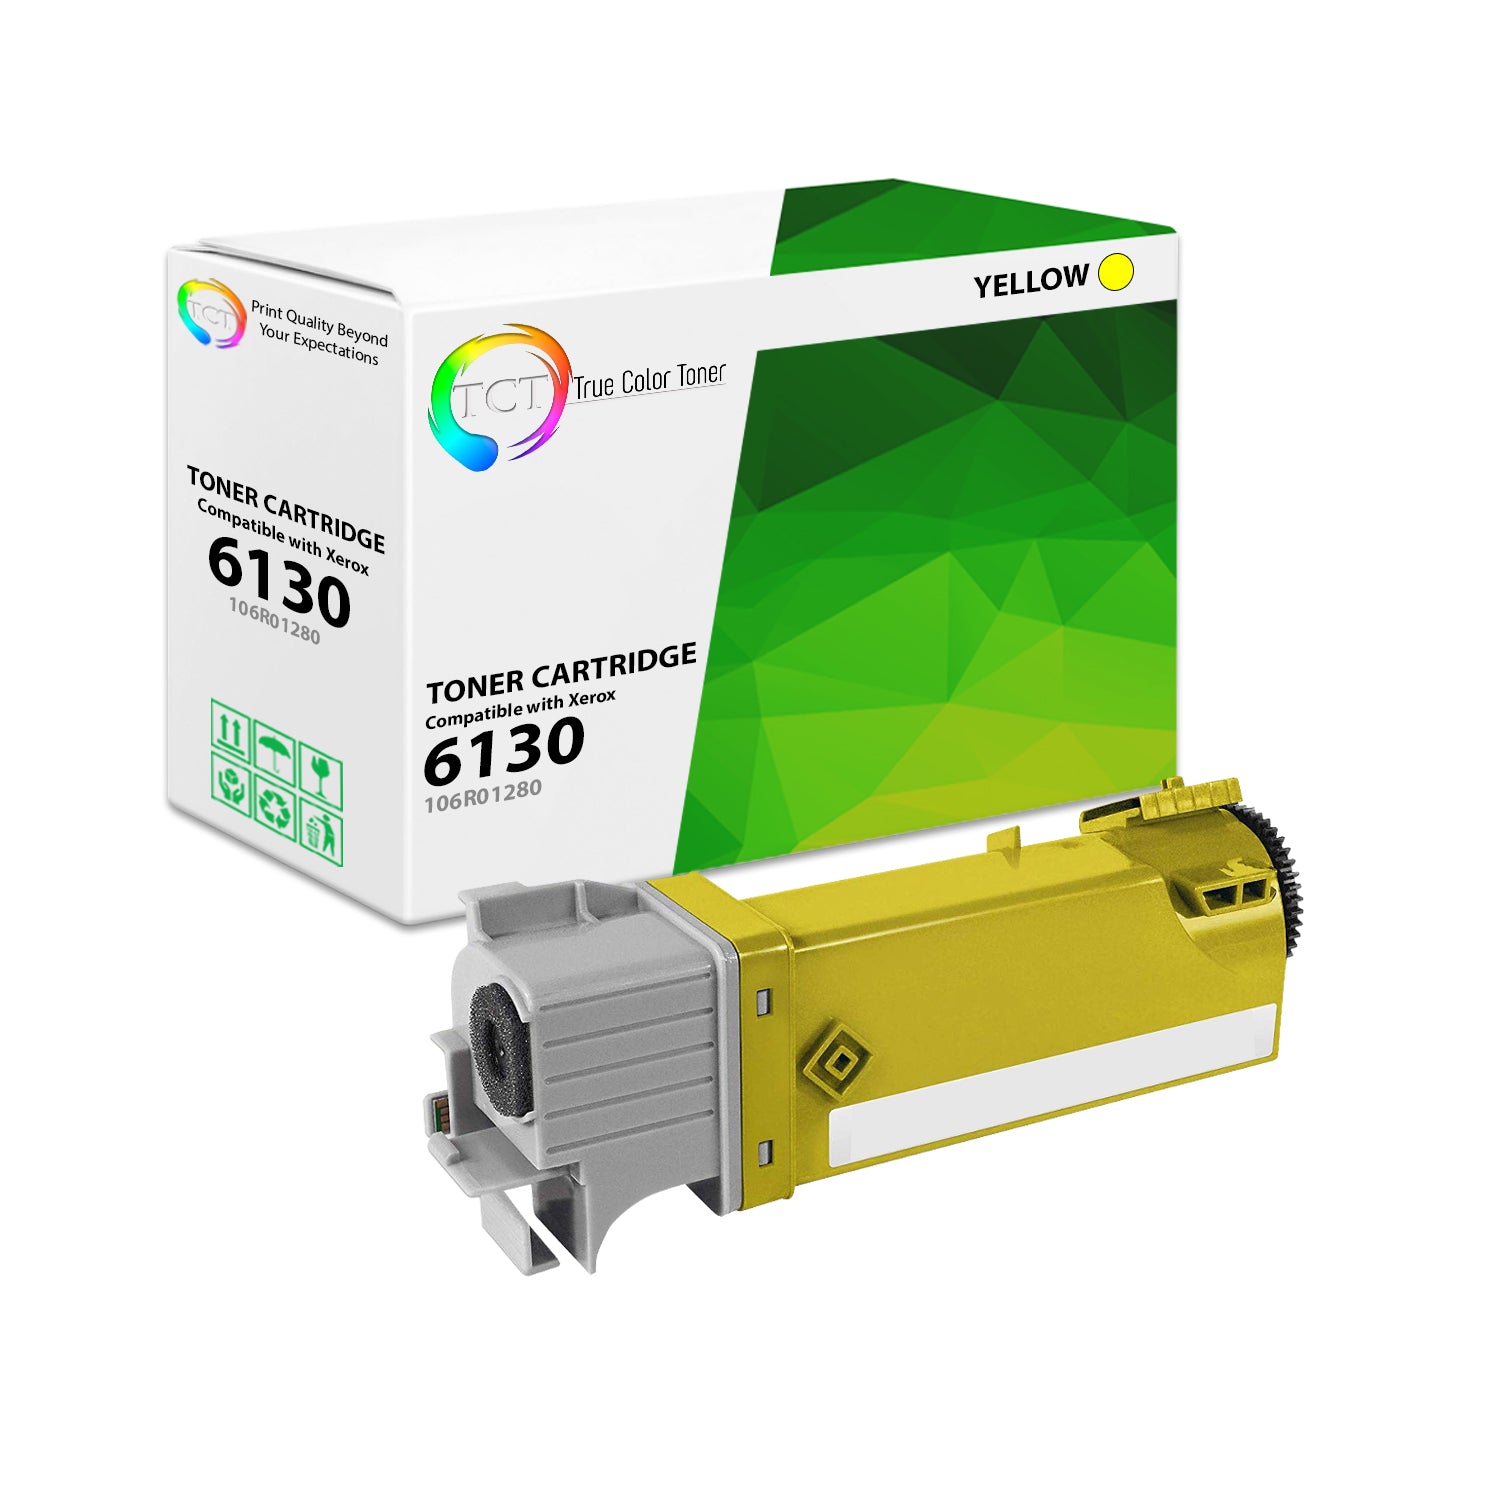 TCT Compatible Toner Cartridge Replacement for the Xerox 6130 Series - 1 Pack Yellow